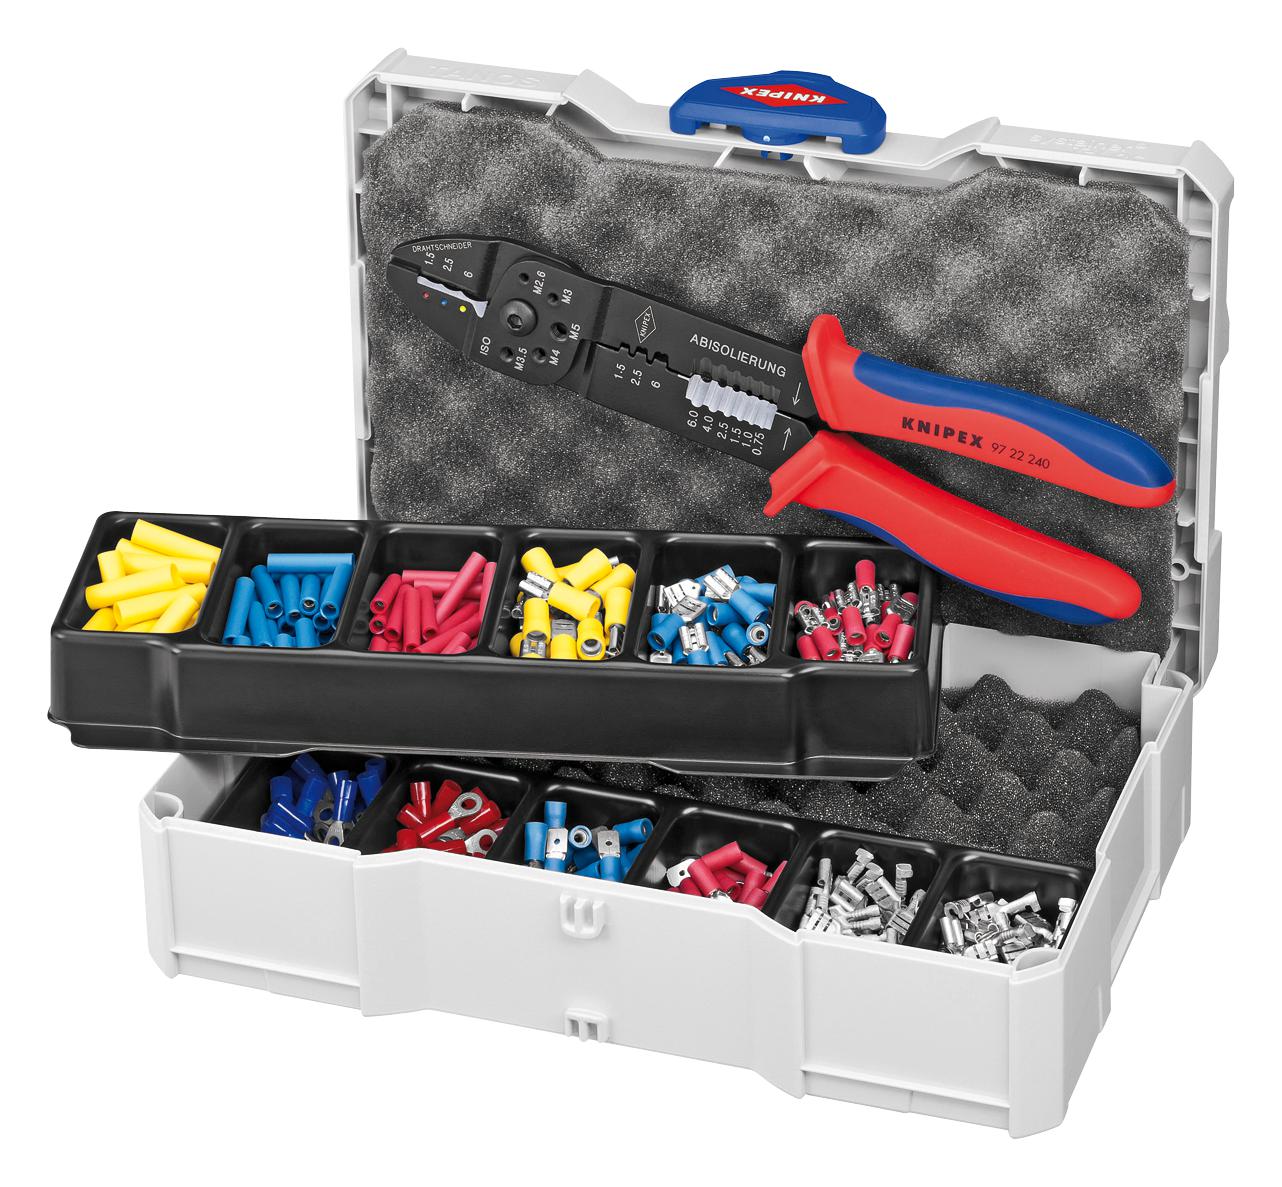 97 90 25 CRIMPING KIT, WITH CRIMP TOOL, 301PC KNIPEX